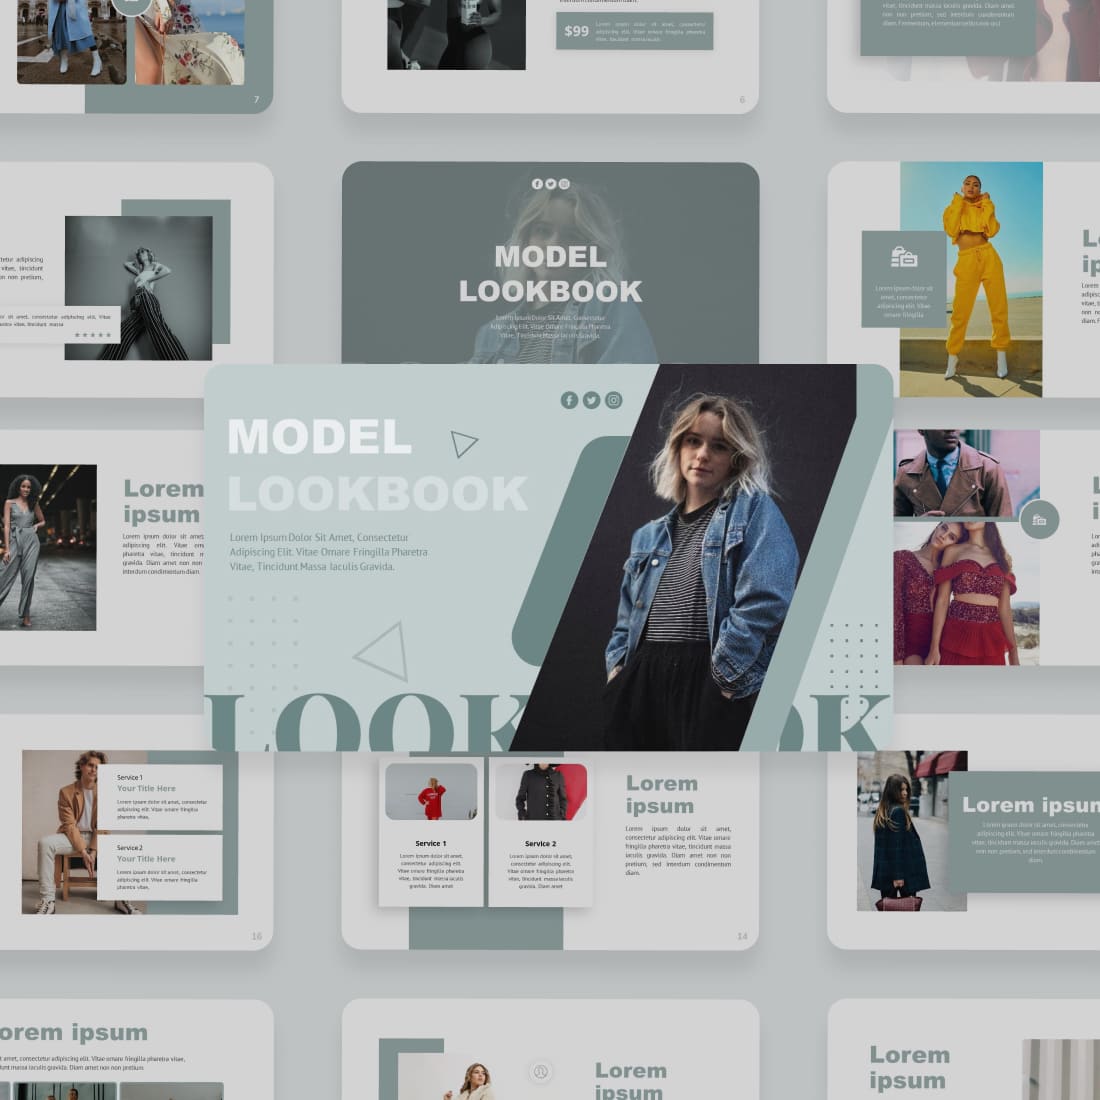 Model Lookbook Powerpoint Template cover.